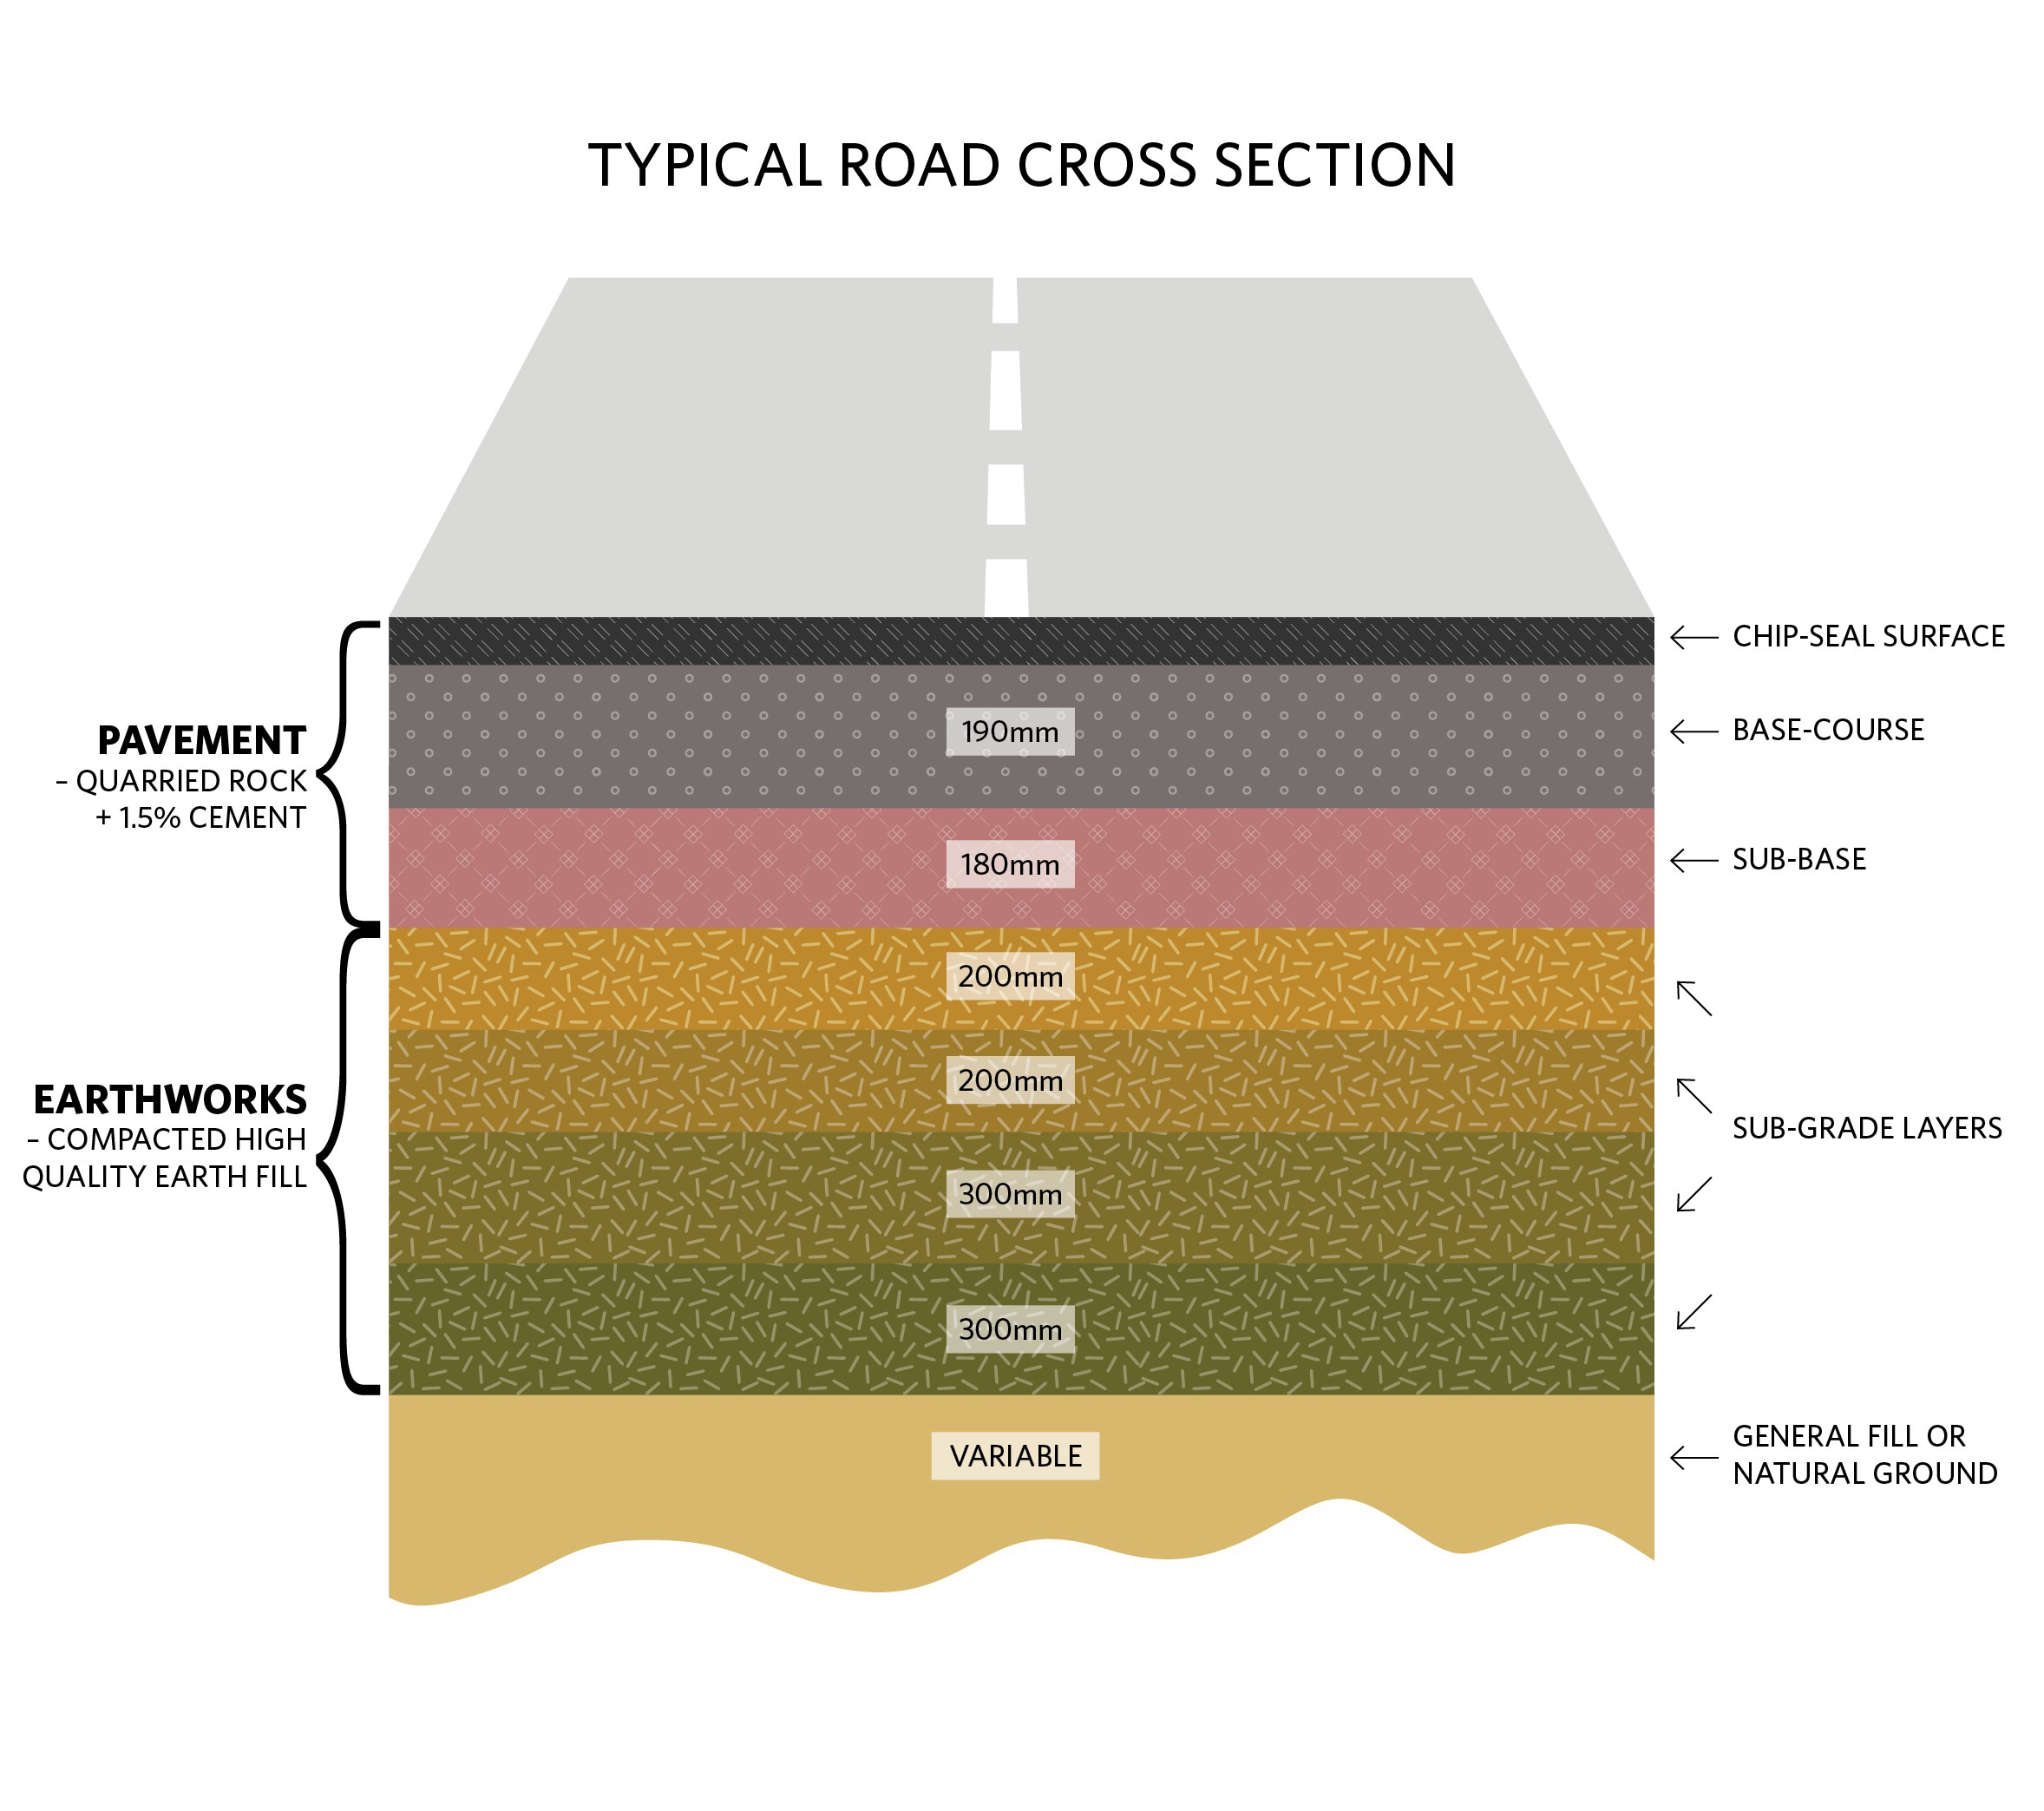 Cross section showing different layers of pavement that makes up a road.